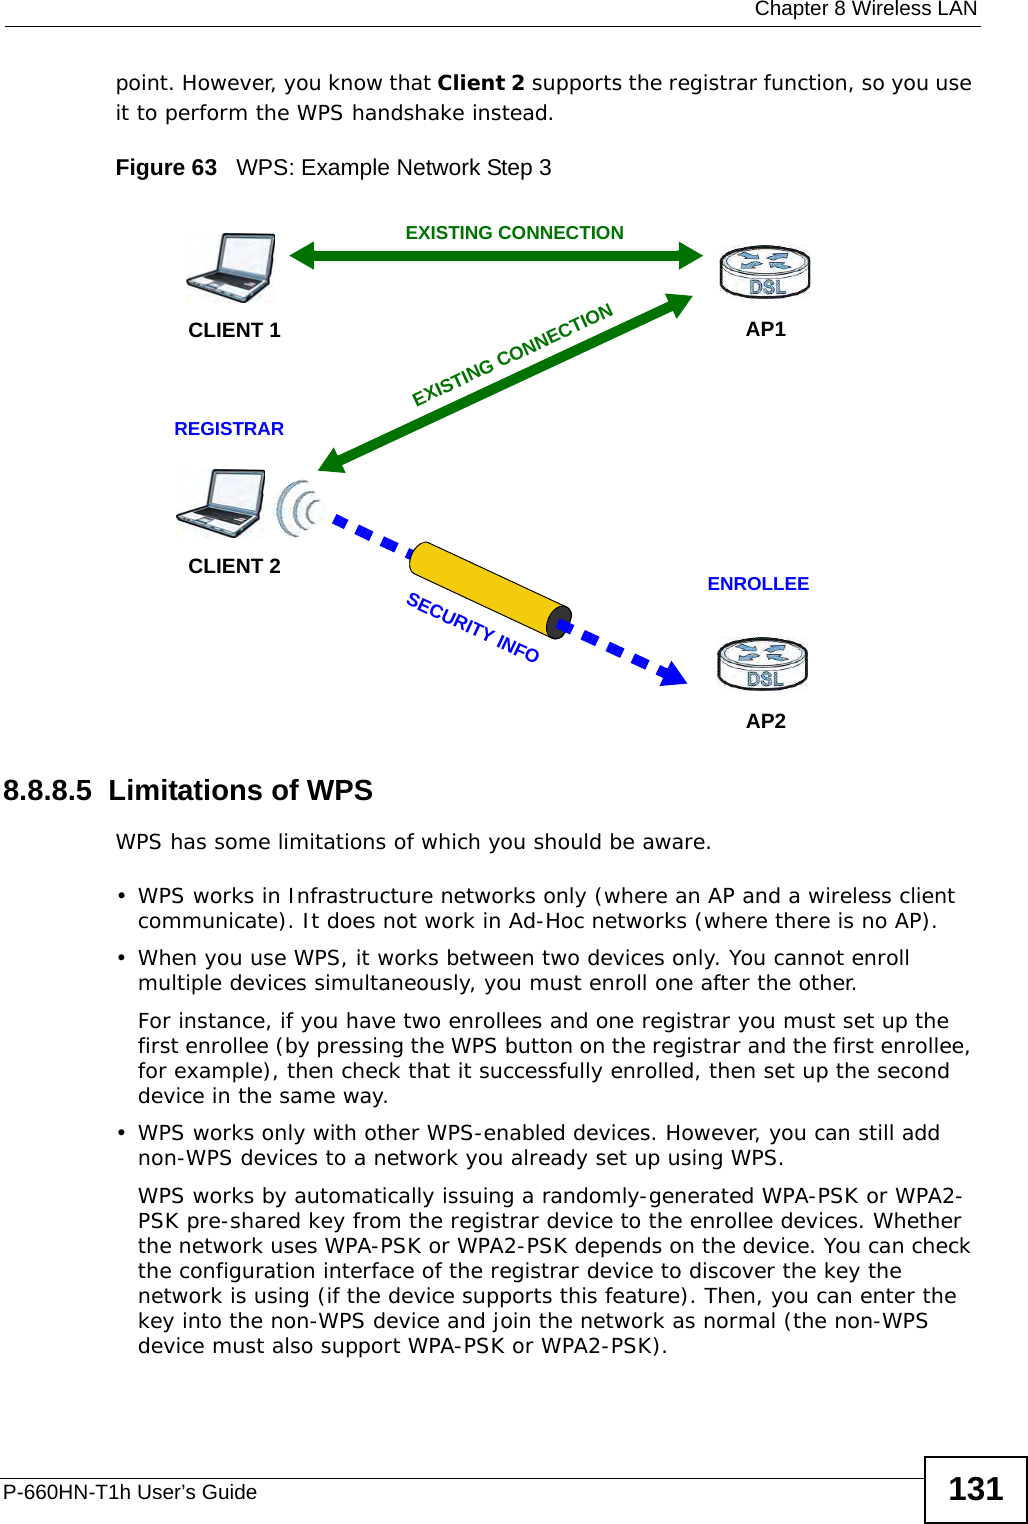  Chapter 8 Wireless LANP-660HN-T1h User’s Guide 131point. However, you know that Client 2 supports the registrar function, so you use it to perform the WPS handshake instead.Figure 63   WPS: Example Network Step 38.8.8.5  Limitations of WPSWPS has some limitations of which you should be aware. • WPS works in Infrastructure networks only (where an AP and a wireless client communicate). It does not work in Ad-Hoc networks (where there is no AP).• When you use WPS, it works between two devices only. You cannot enroll multiple devices simultaneously, you must enroll one after the other. For instance, if you have two enrollees and one registrar you must set up the first enrollee (by pressing the WPS button on the registrar and the first enrollee, for example), then check that it successfully enrolled, then set up the second device in the same way.• WPS works only with other WPS-enabled devices. However, you can still add non-WPS devices to a network you already set up using WPS. WPS works by automatically issuing a randomly-generated WPA-PSK or WPA2-PSK pre-shared key from the registrar device to the enrollee devices. Whether the network uses WPA-PSK or WPA2-PSK depends on the device. You can check the configuration interface of the registrar device to discover the key the network is using (if the device supports this feature). Then, you can enter the key into the non-WPS device and join the network as normal (the non-WPS device must also support WPA-PSK or WPA2-PSK).CLIENT 1 AP1REGISTRARCLIENT 2EXISTING CONNECTIONSECURITY INFOENROLLEEAP2EXISTING CONNECTION